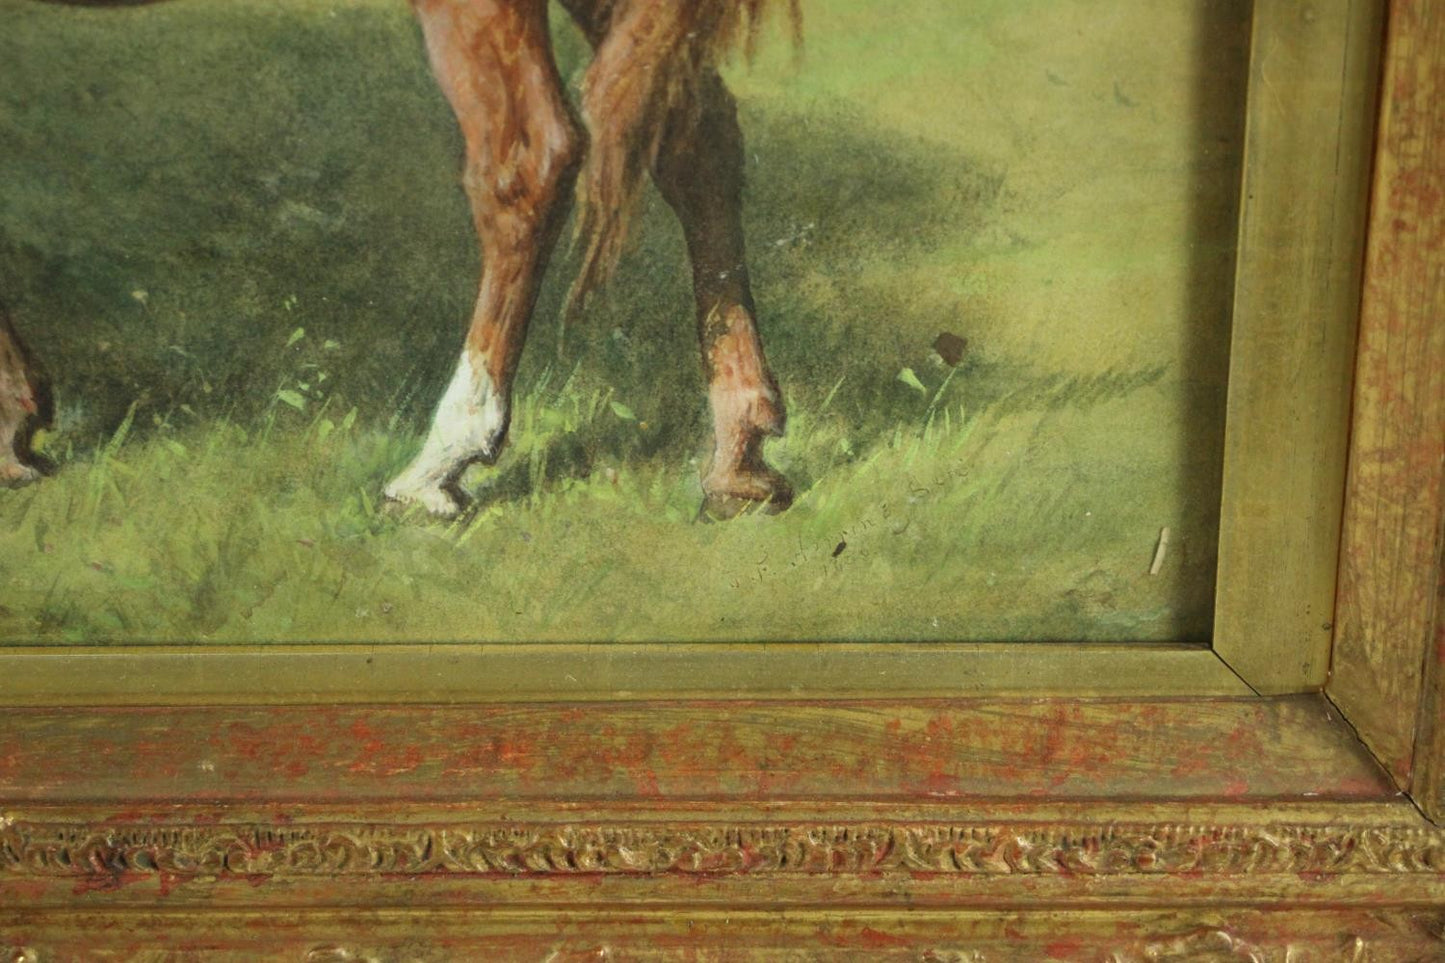 Mare and Foal c1840   by John Frederick Herring